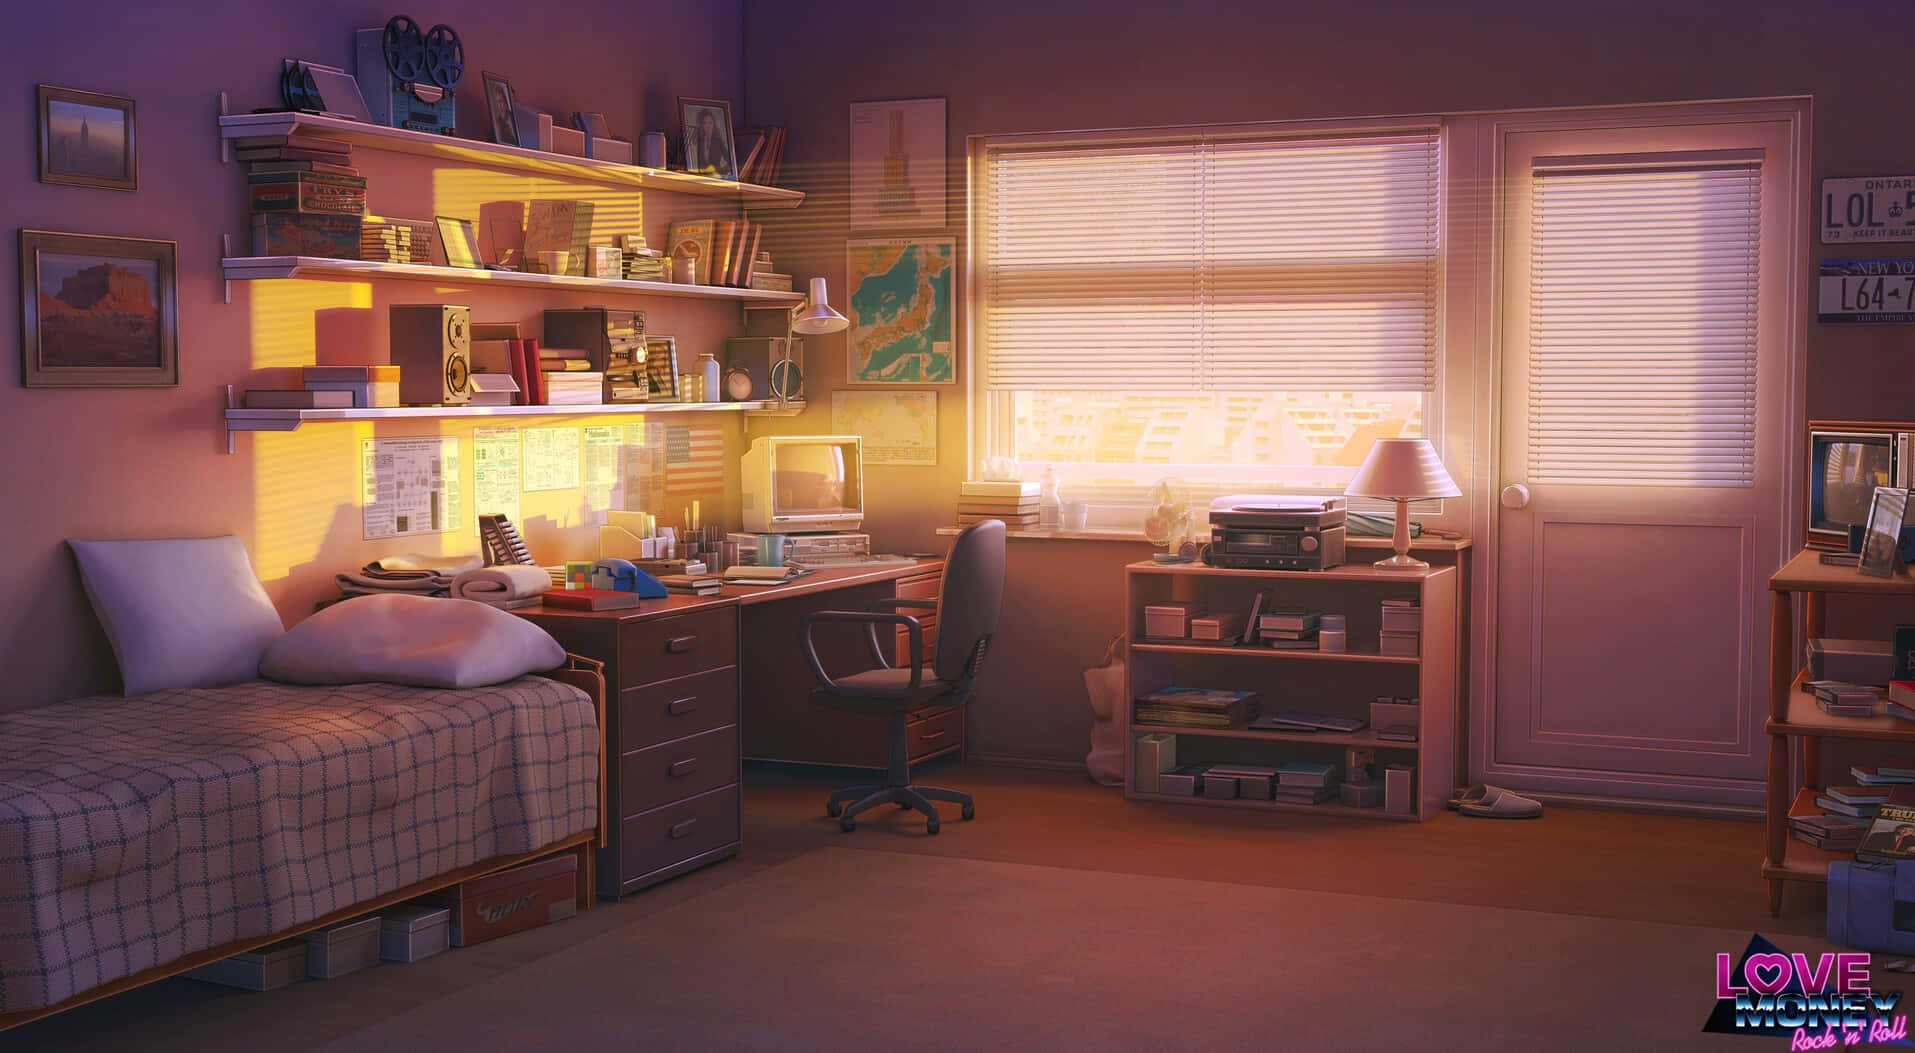 “Bring a bit of your favourite anime into your bedroom with this cozy, cute anime-inspired look.”